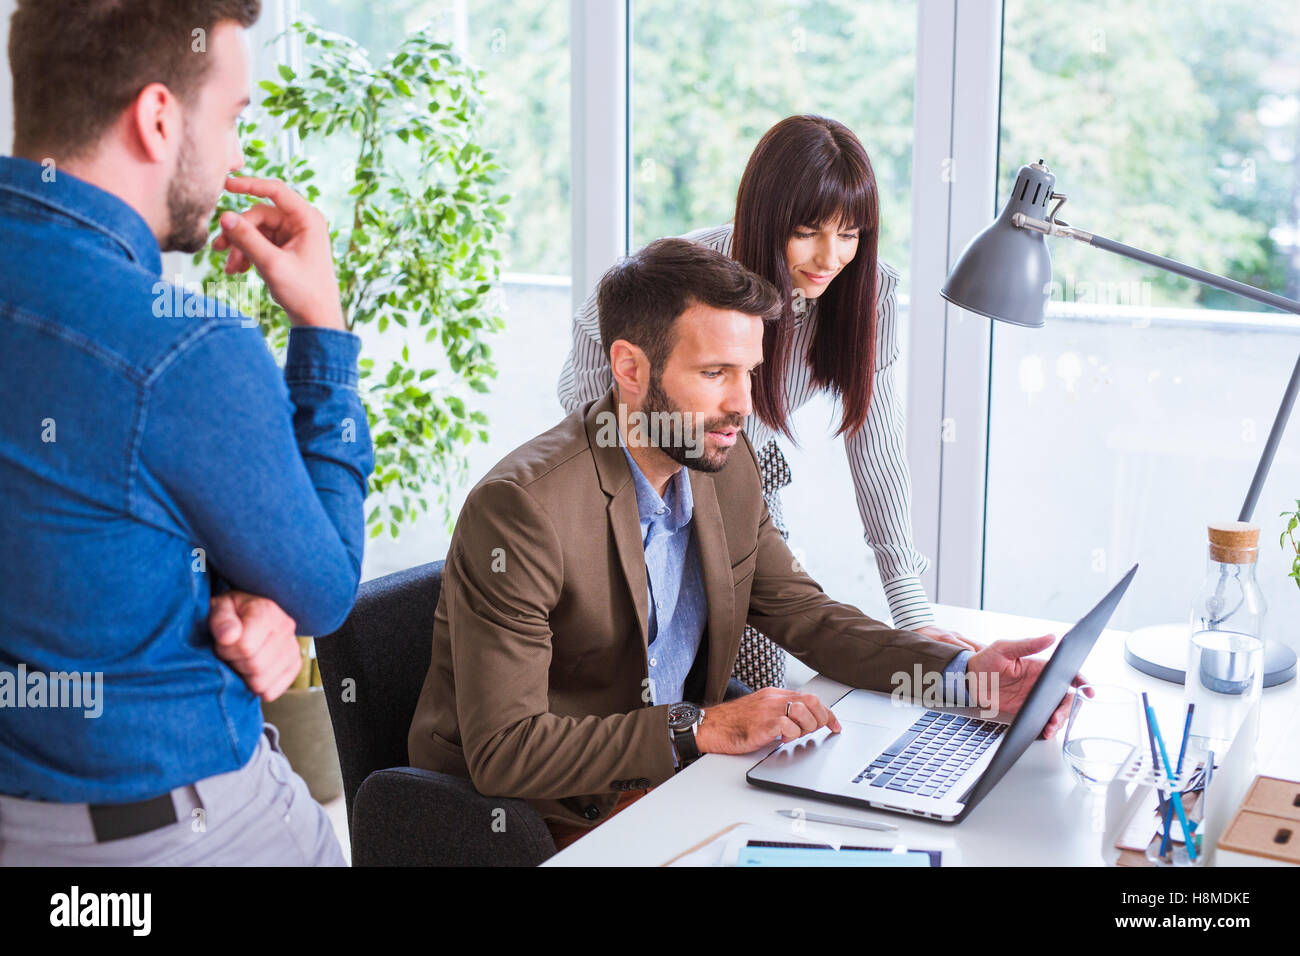 Men and women working in office Stock Photo